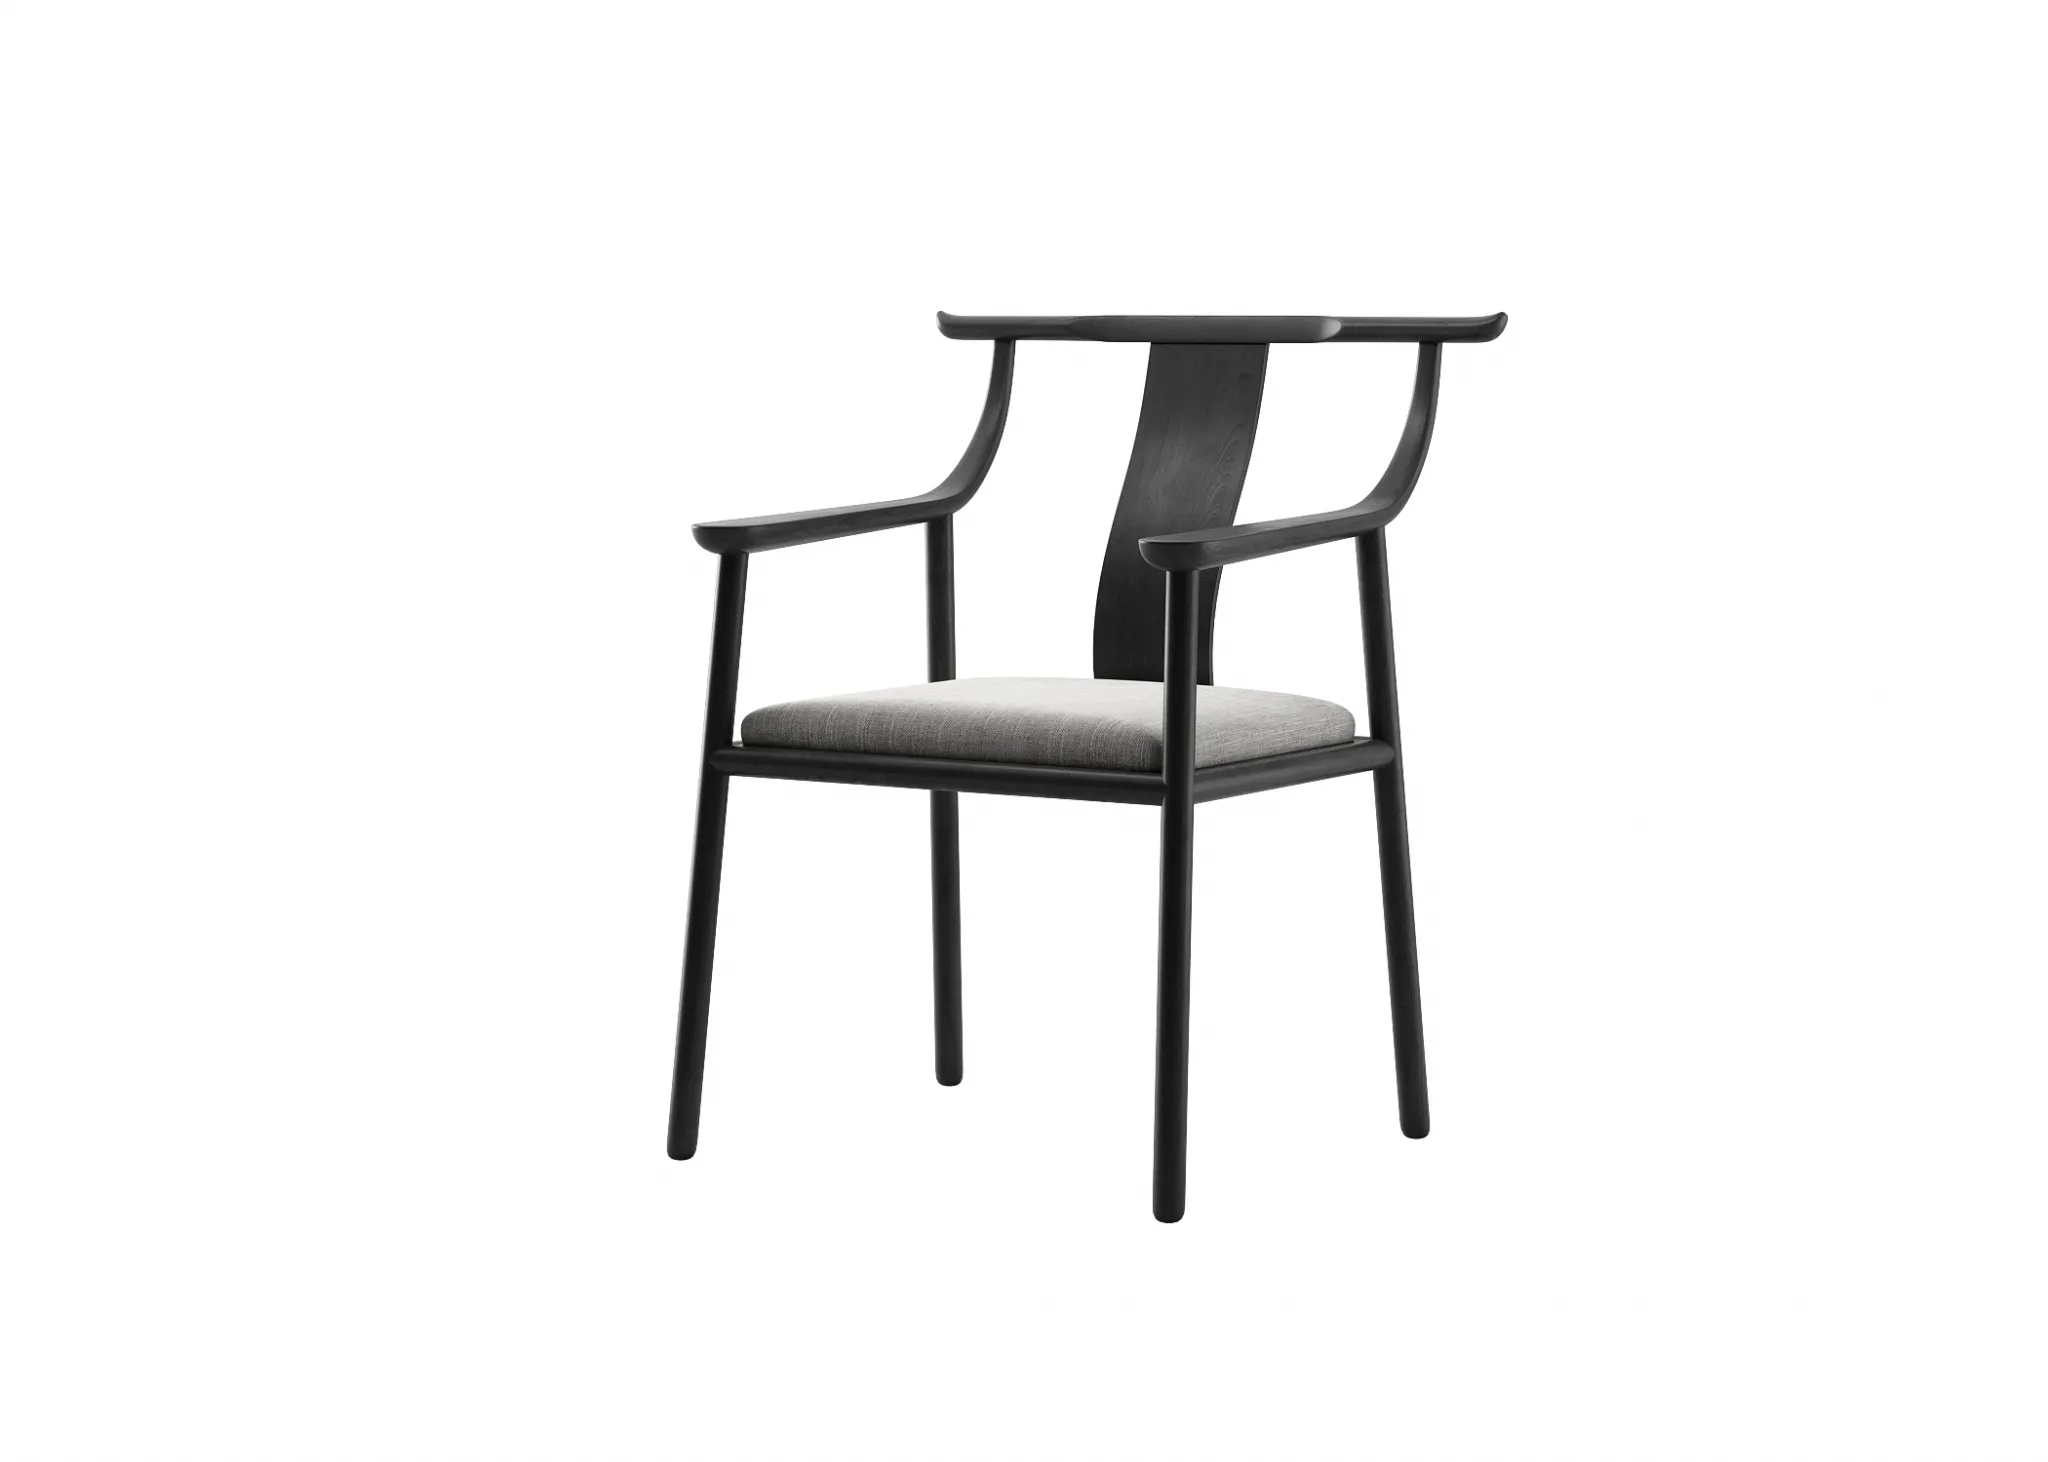 FURNITURE 3D MODELS – CHAIRS – 0520